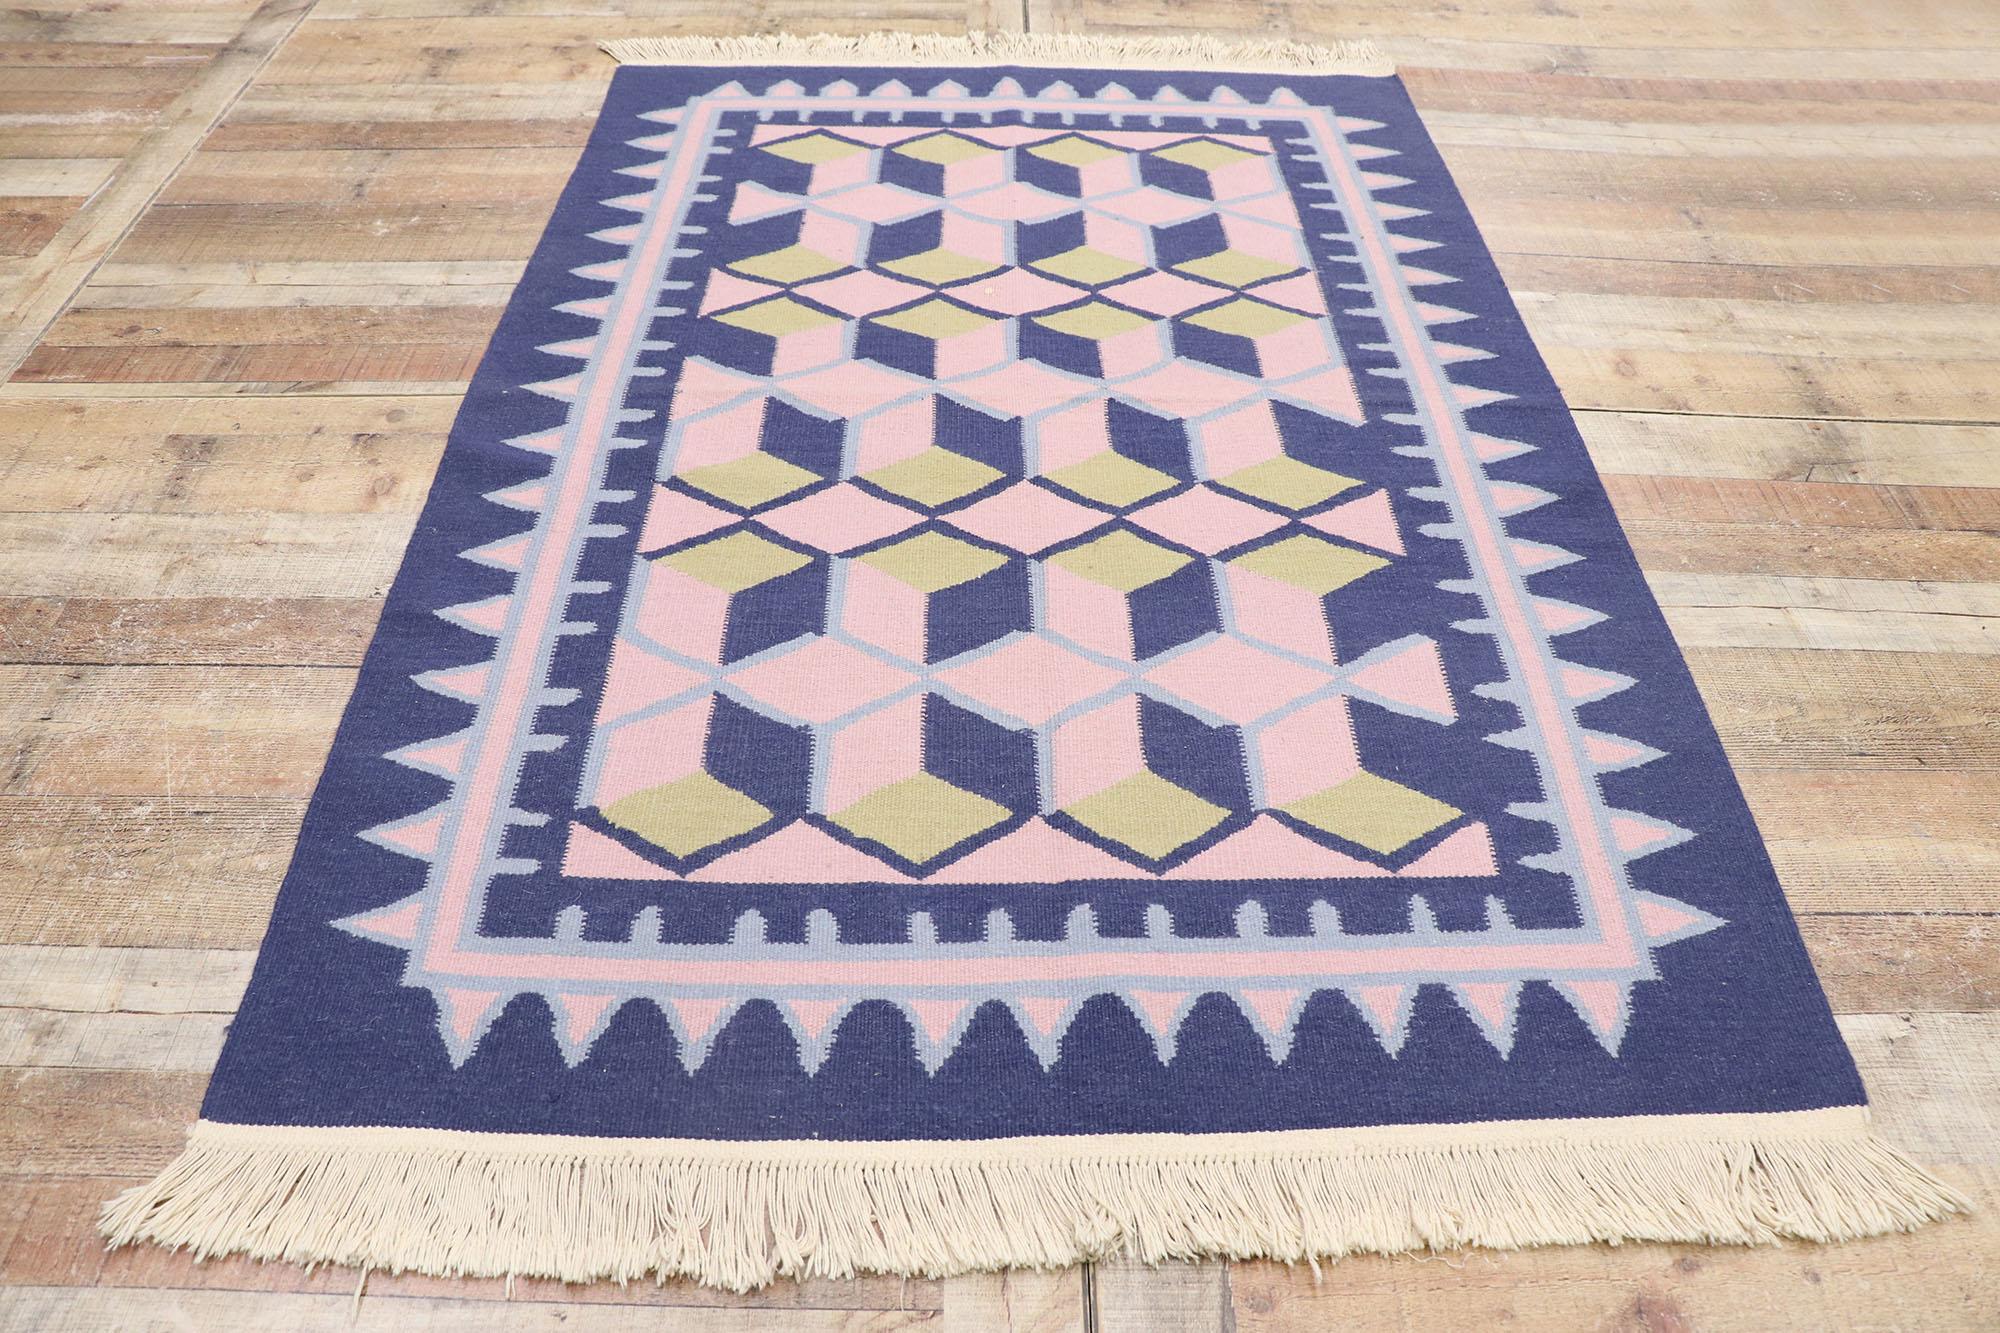 Wool Vintage Chinese Geometric Kilim Rug with Post-Modern Cubist Style